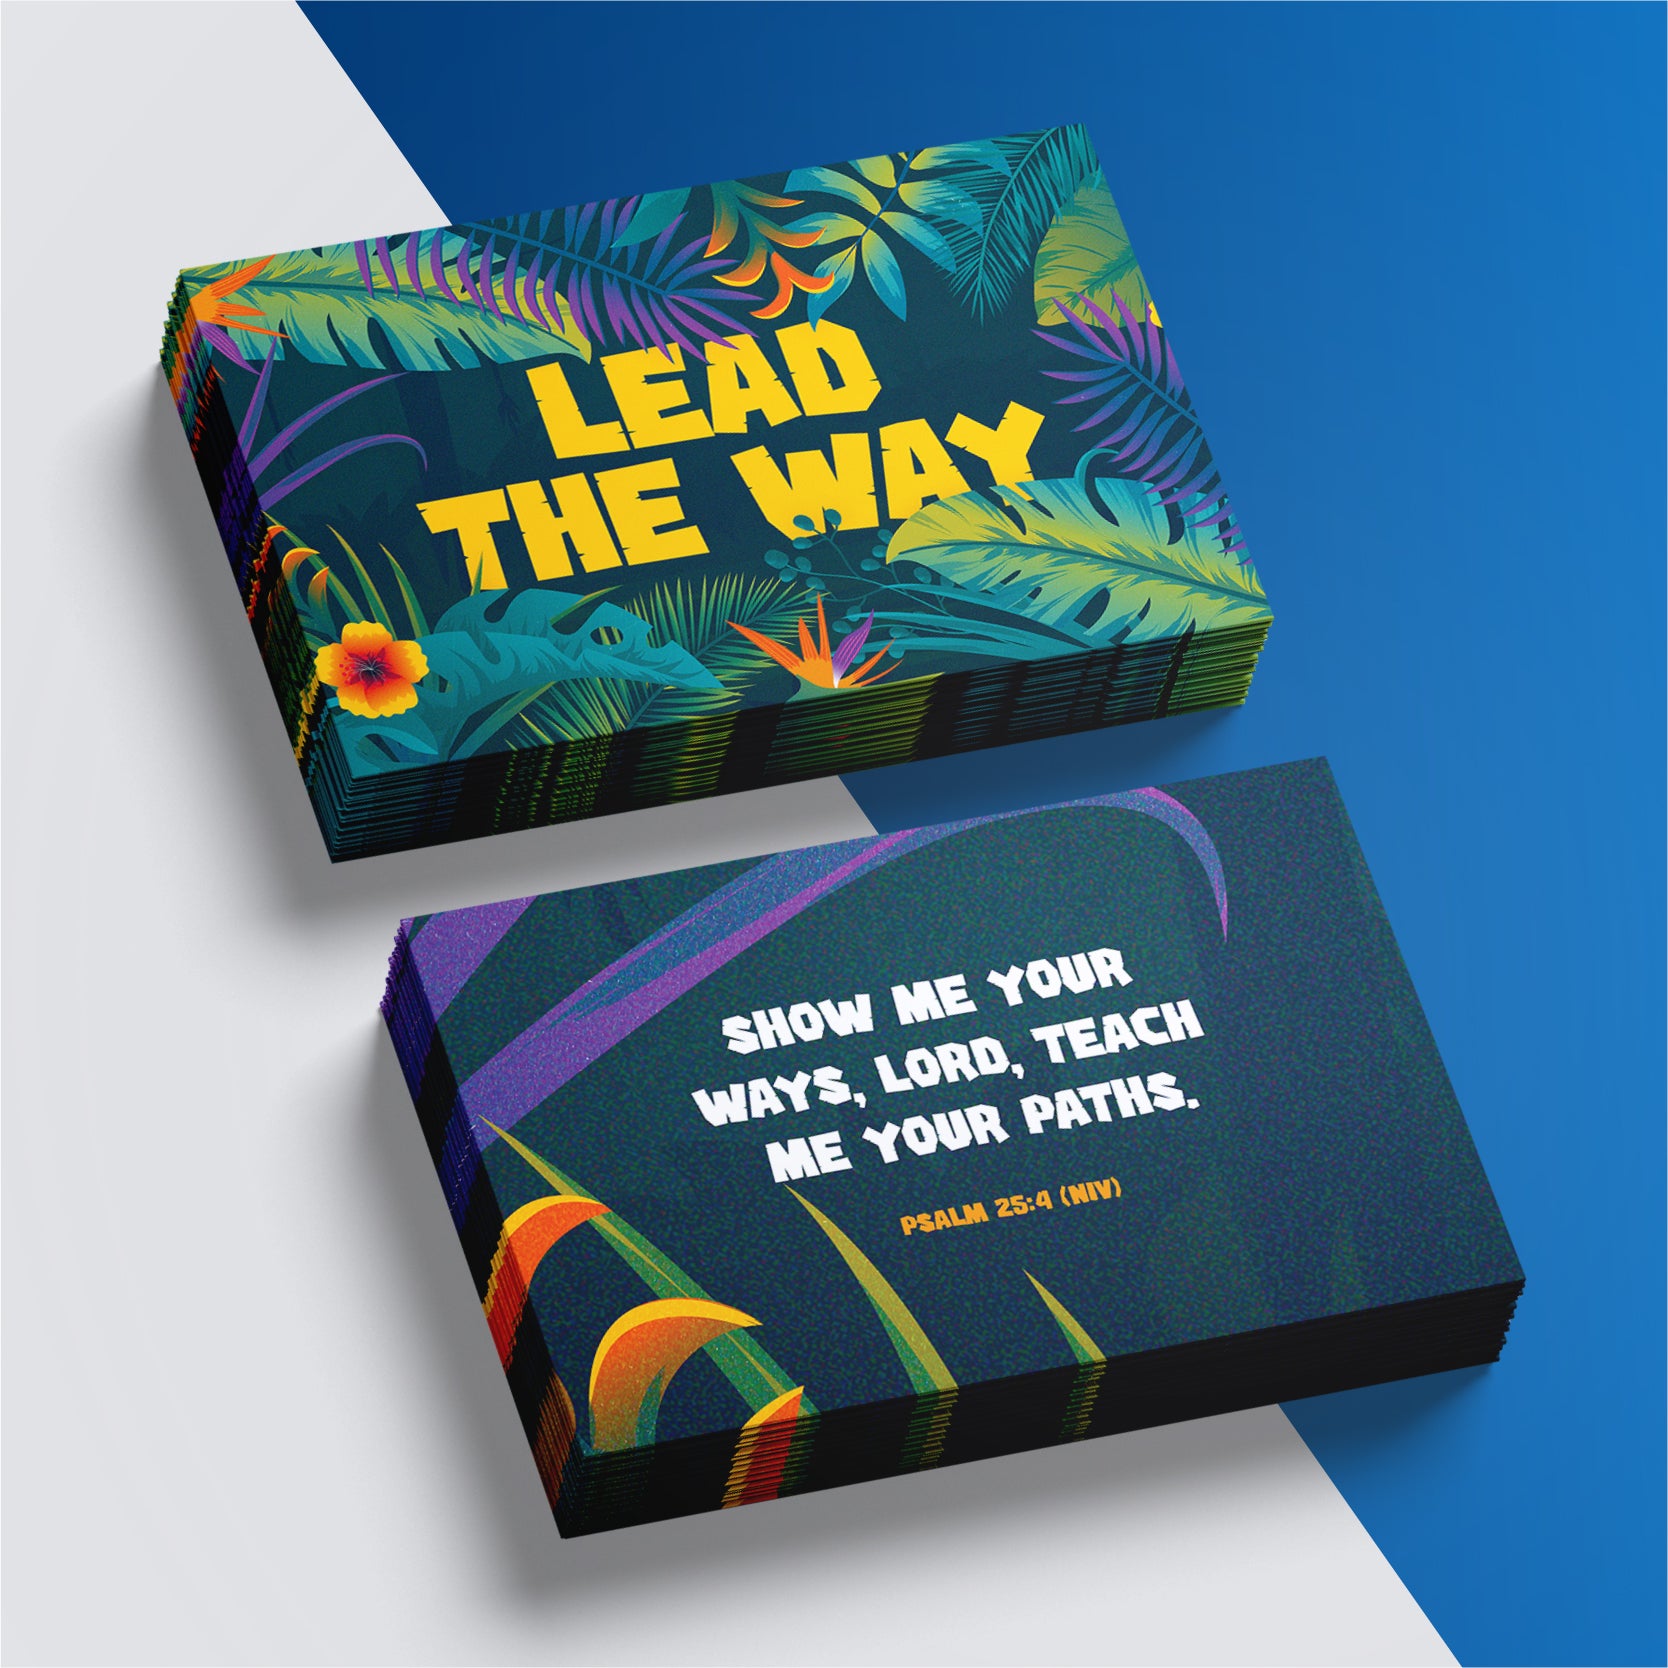 Lead The Way Memory Card Pack